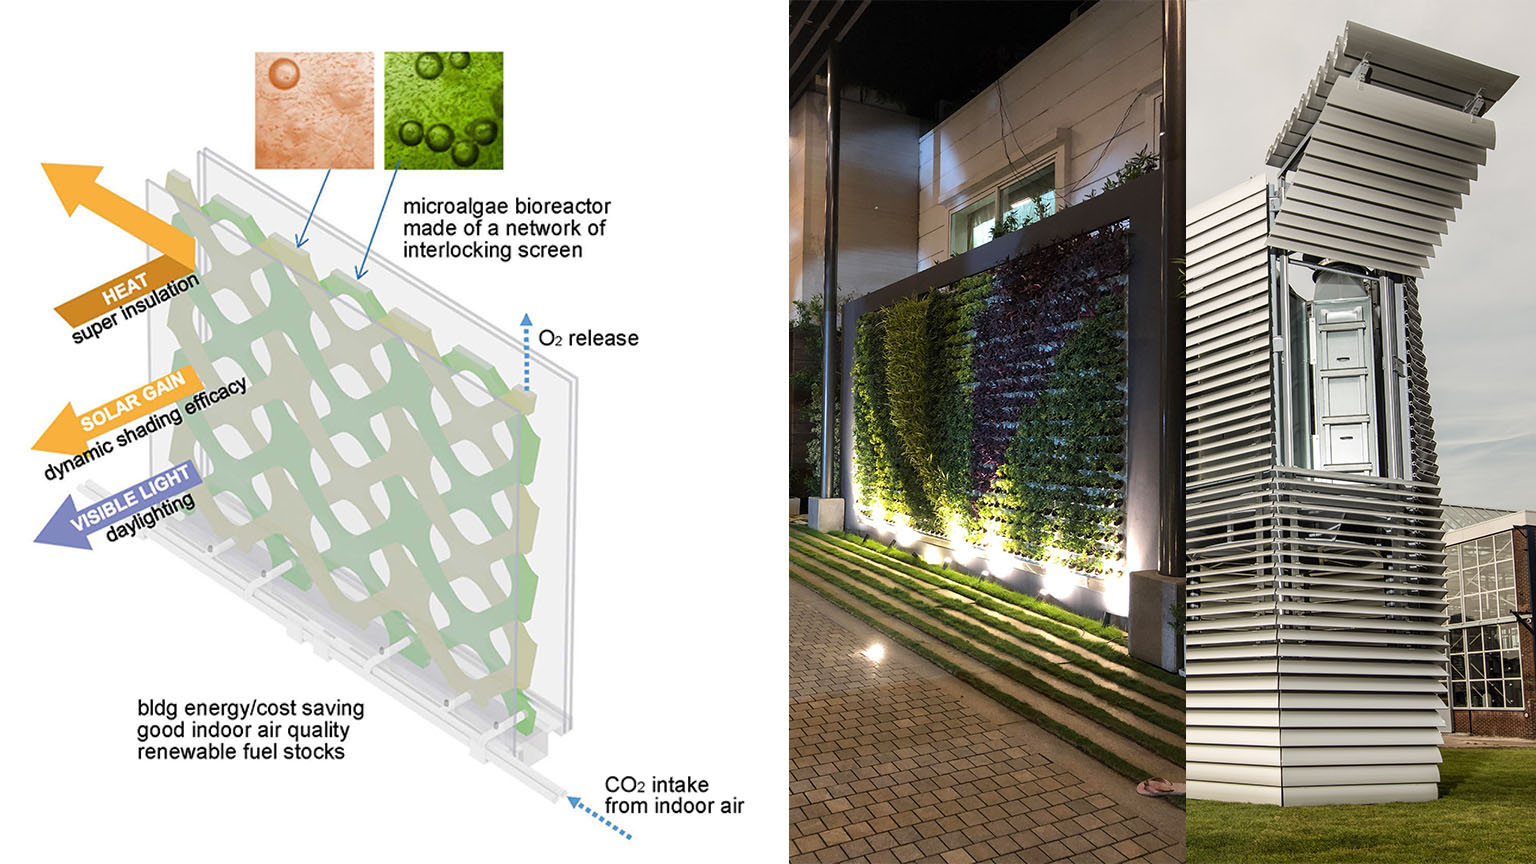 An agglomeration of various Carbon Sequestration (CS) techniques including the prototype of a microalgae façade, a vertical greenery system and smog free tower in an urban space. (Images by Integrated Design Research Lab (UNC Charlotte), Anurag Rathi, Daan Roosegarde (www.studioroosegaarde.net)) 